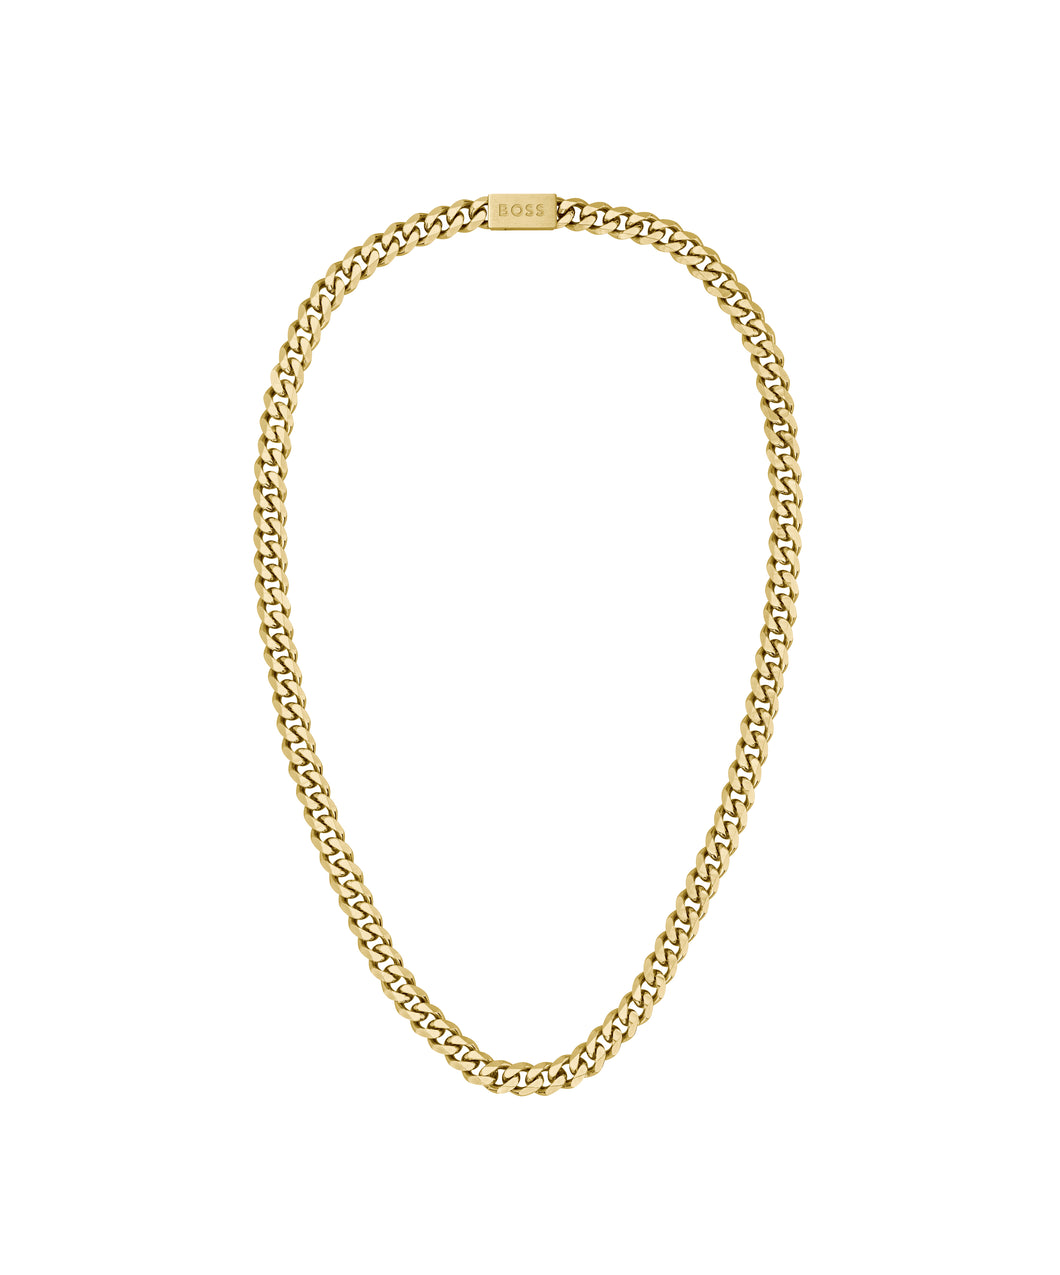 Gents BOSS Chain for Him Light Yellow Gold IP Necklace